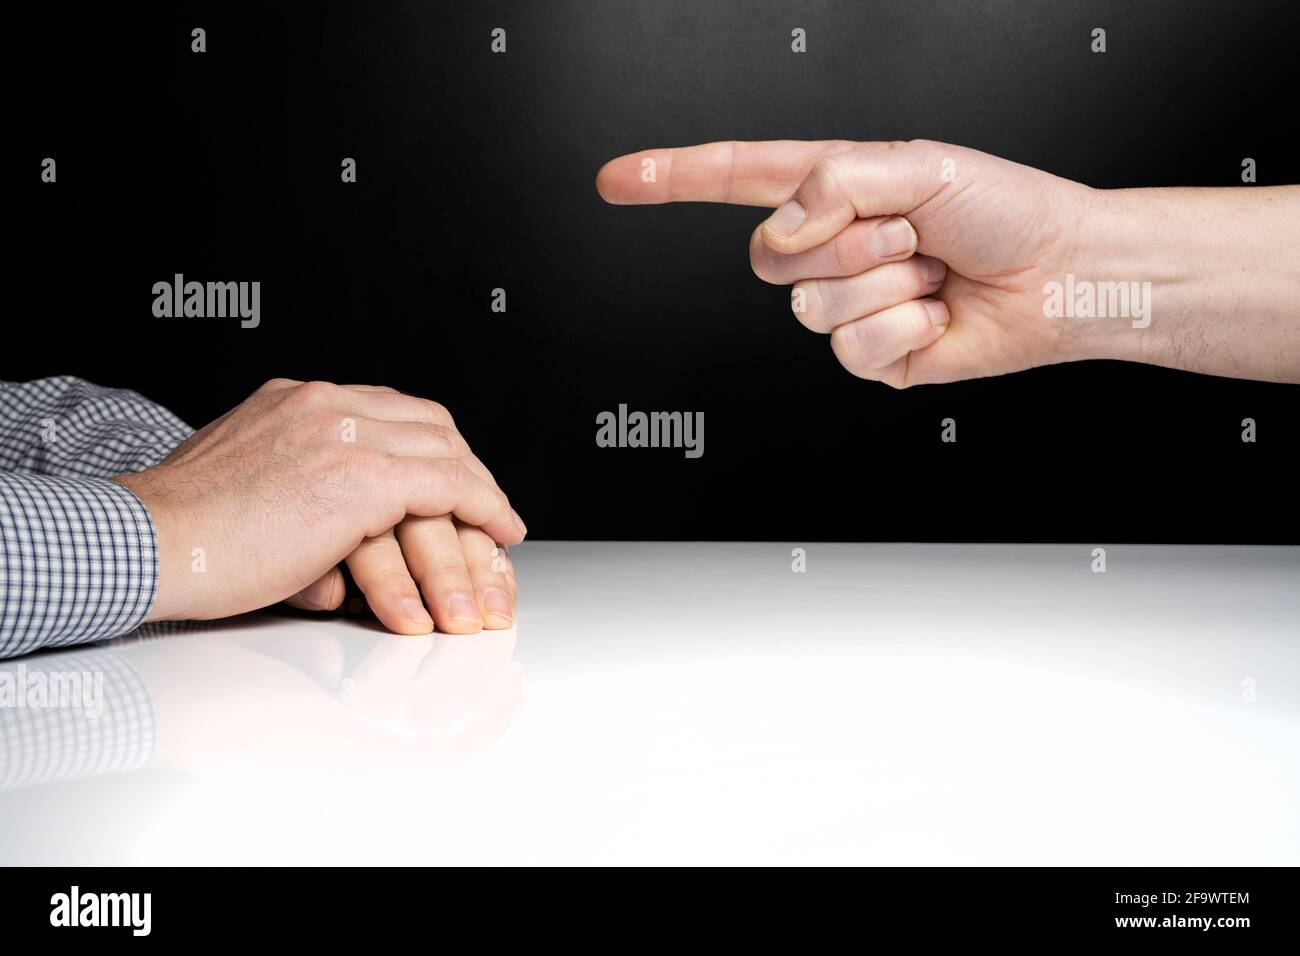 one man points his finger to another man in front Stock Photo